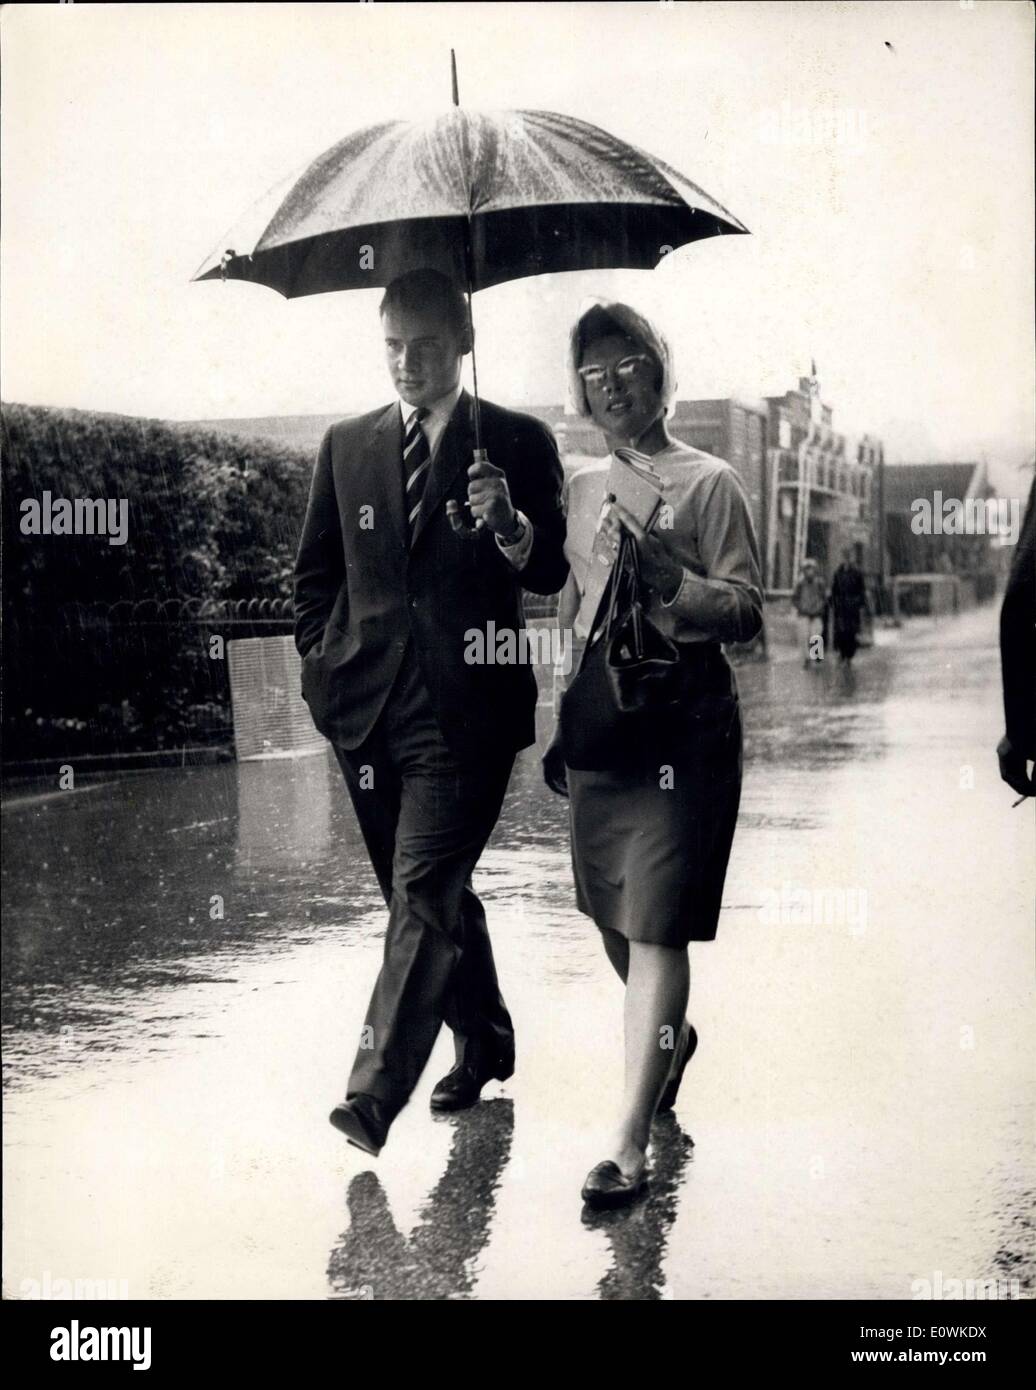 Jul. 06, 1963 - Heavy Rain Delays Play At Wimbledon: Heavy rain was delaying the start of play in the tennis tournament at Wimbledon this afternoon. Photo shows One of today's finalist Billie Jean Moffitt shares an umbrella with a friend at Wimbledon this afternoon. Stock Photo